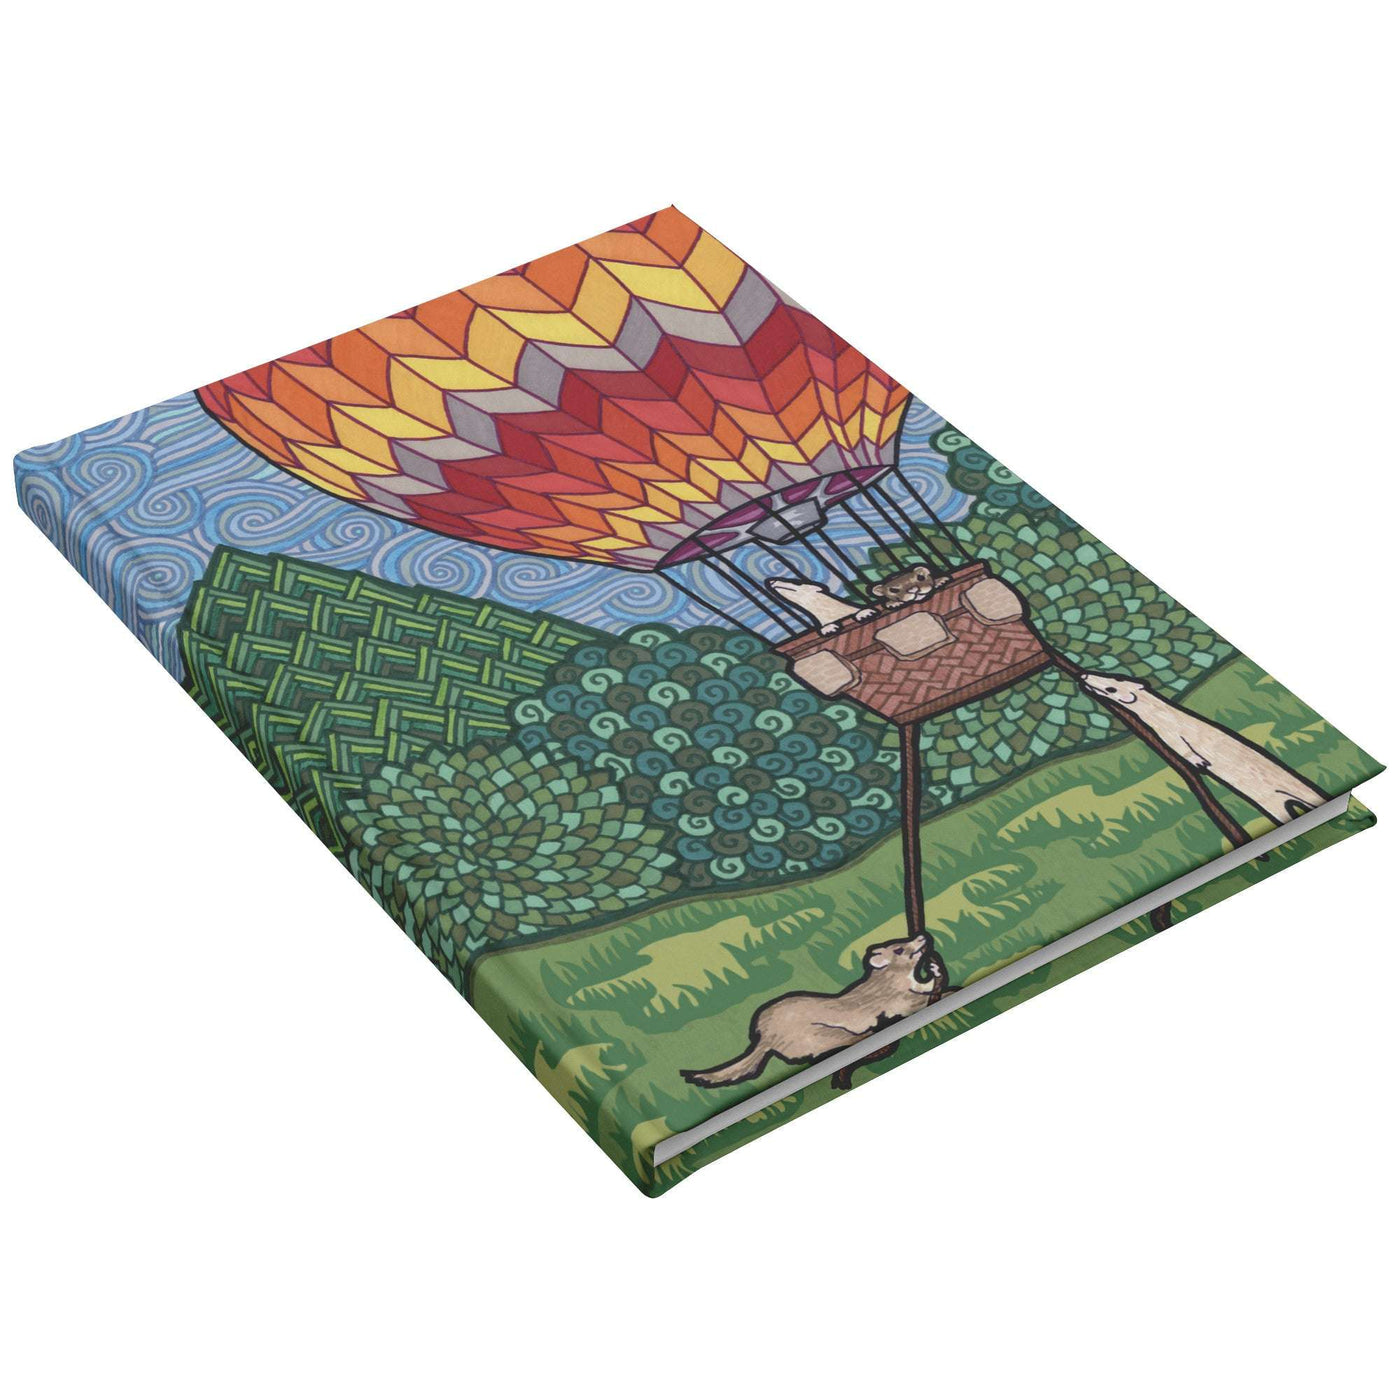 A Ferret Flight Journal with a colorful cover illustrating a hot air balloon over a lush landscape with ferrets in the basket.